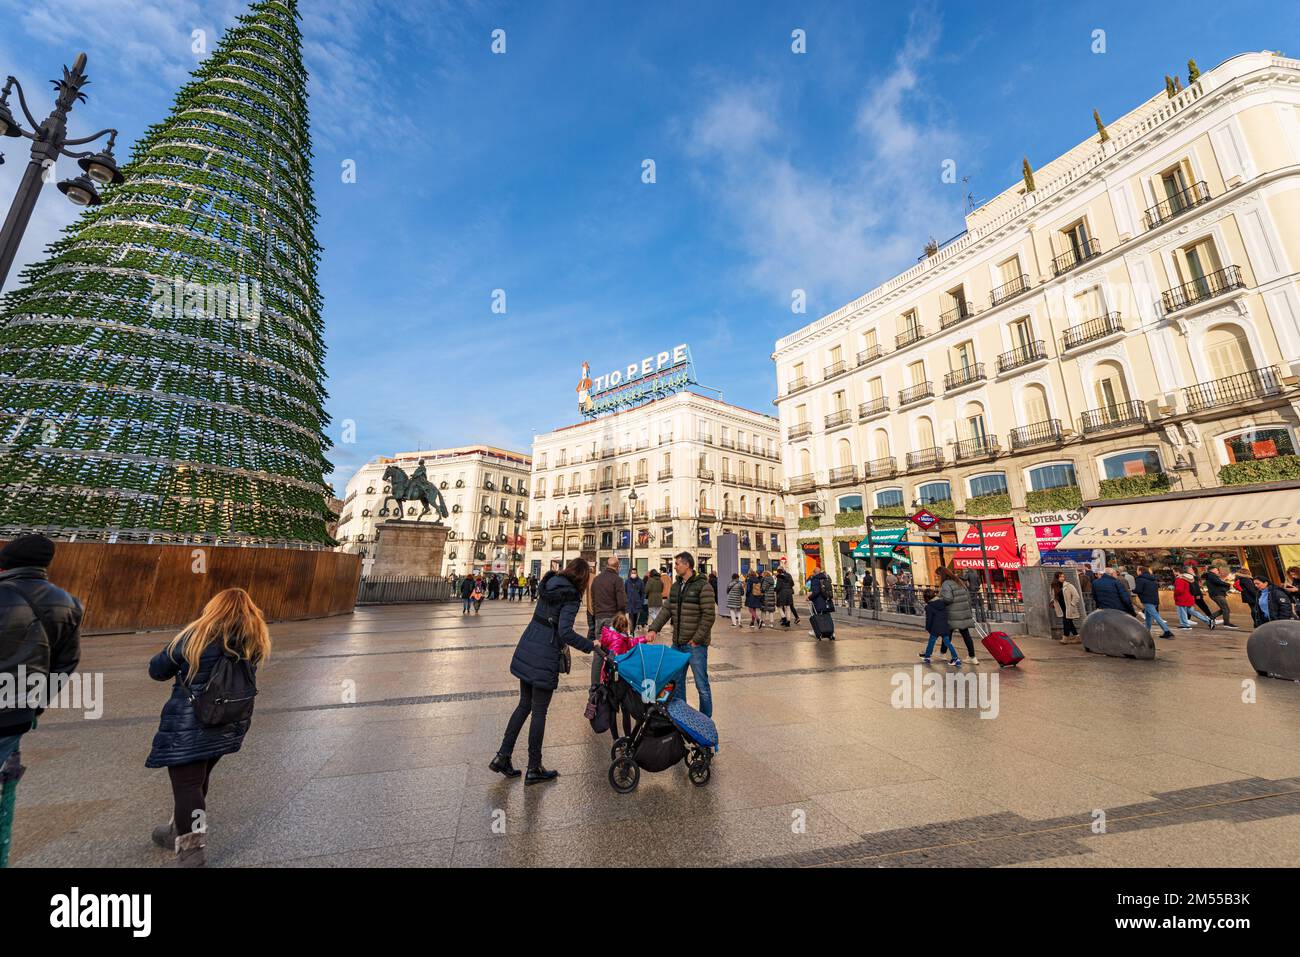 Puerta del Sol with the Christmas Tree, one of the most important and famous squares in Madrid downtown, community of Madrid, Spain, southern Europe. Stock Photo